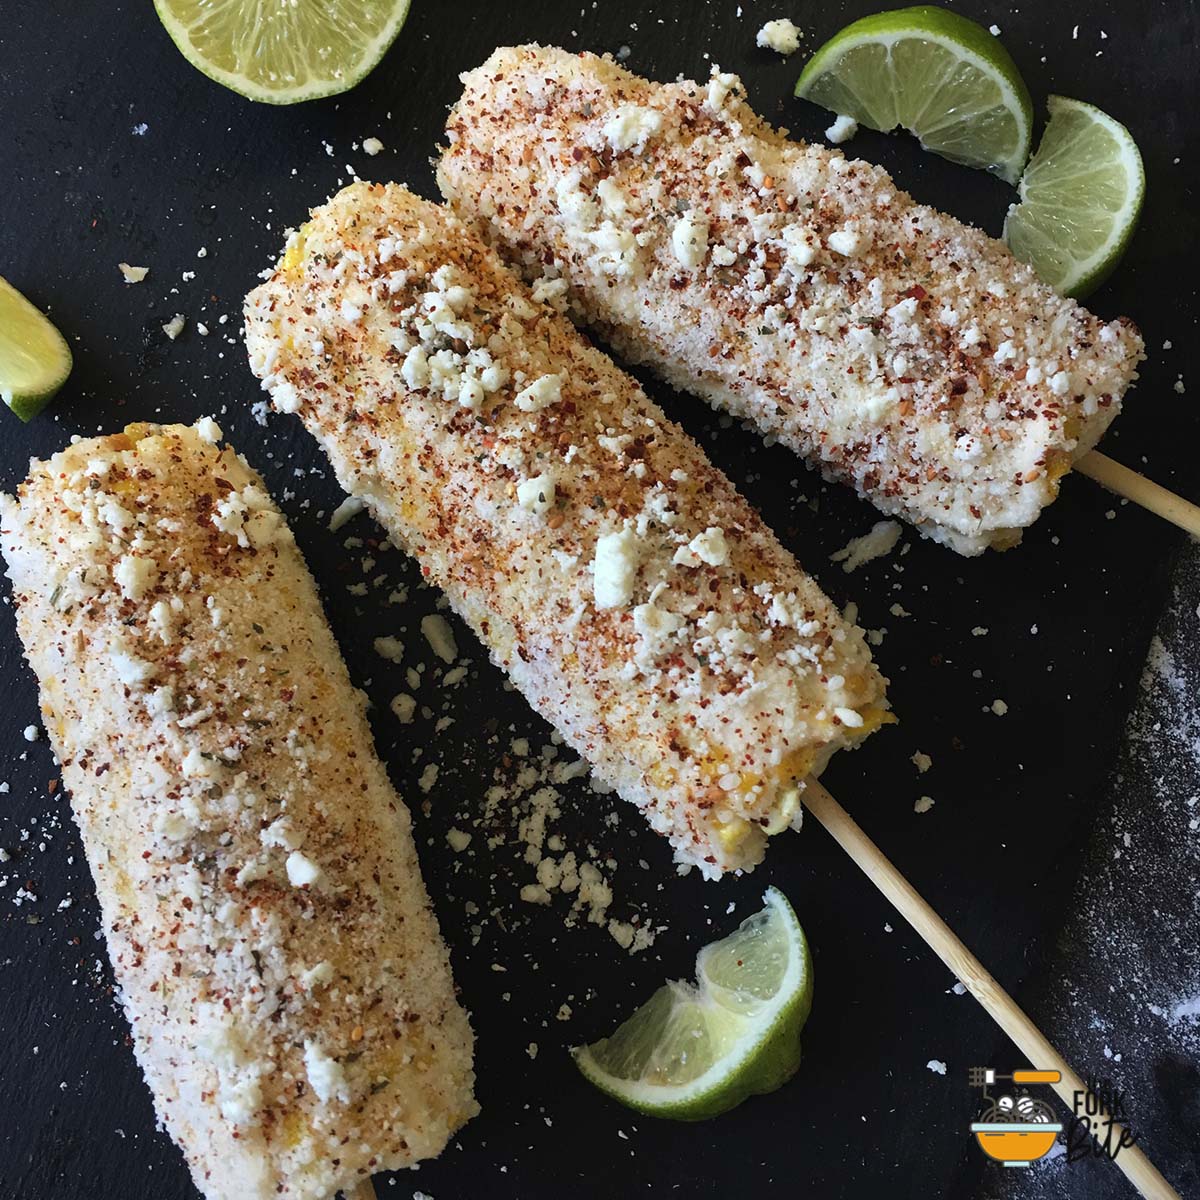 We all couldn’t get enough of this Elote Cuban corn on the cob. This is one of the best corn recipes you will eat!